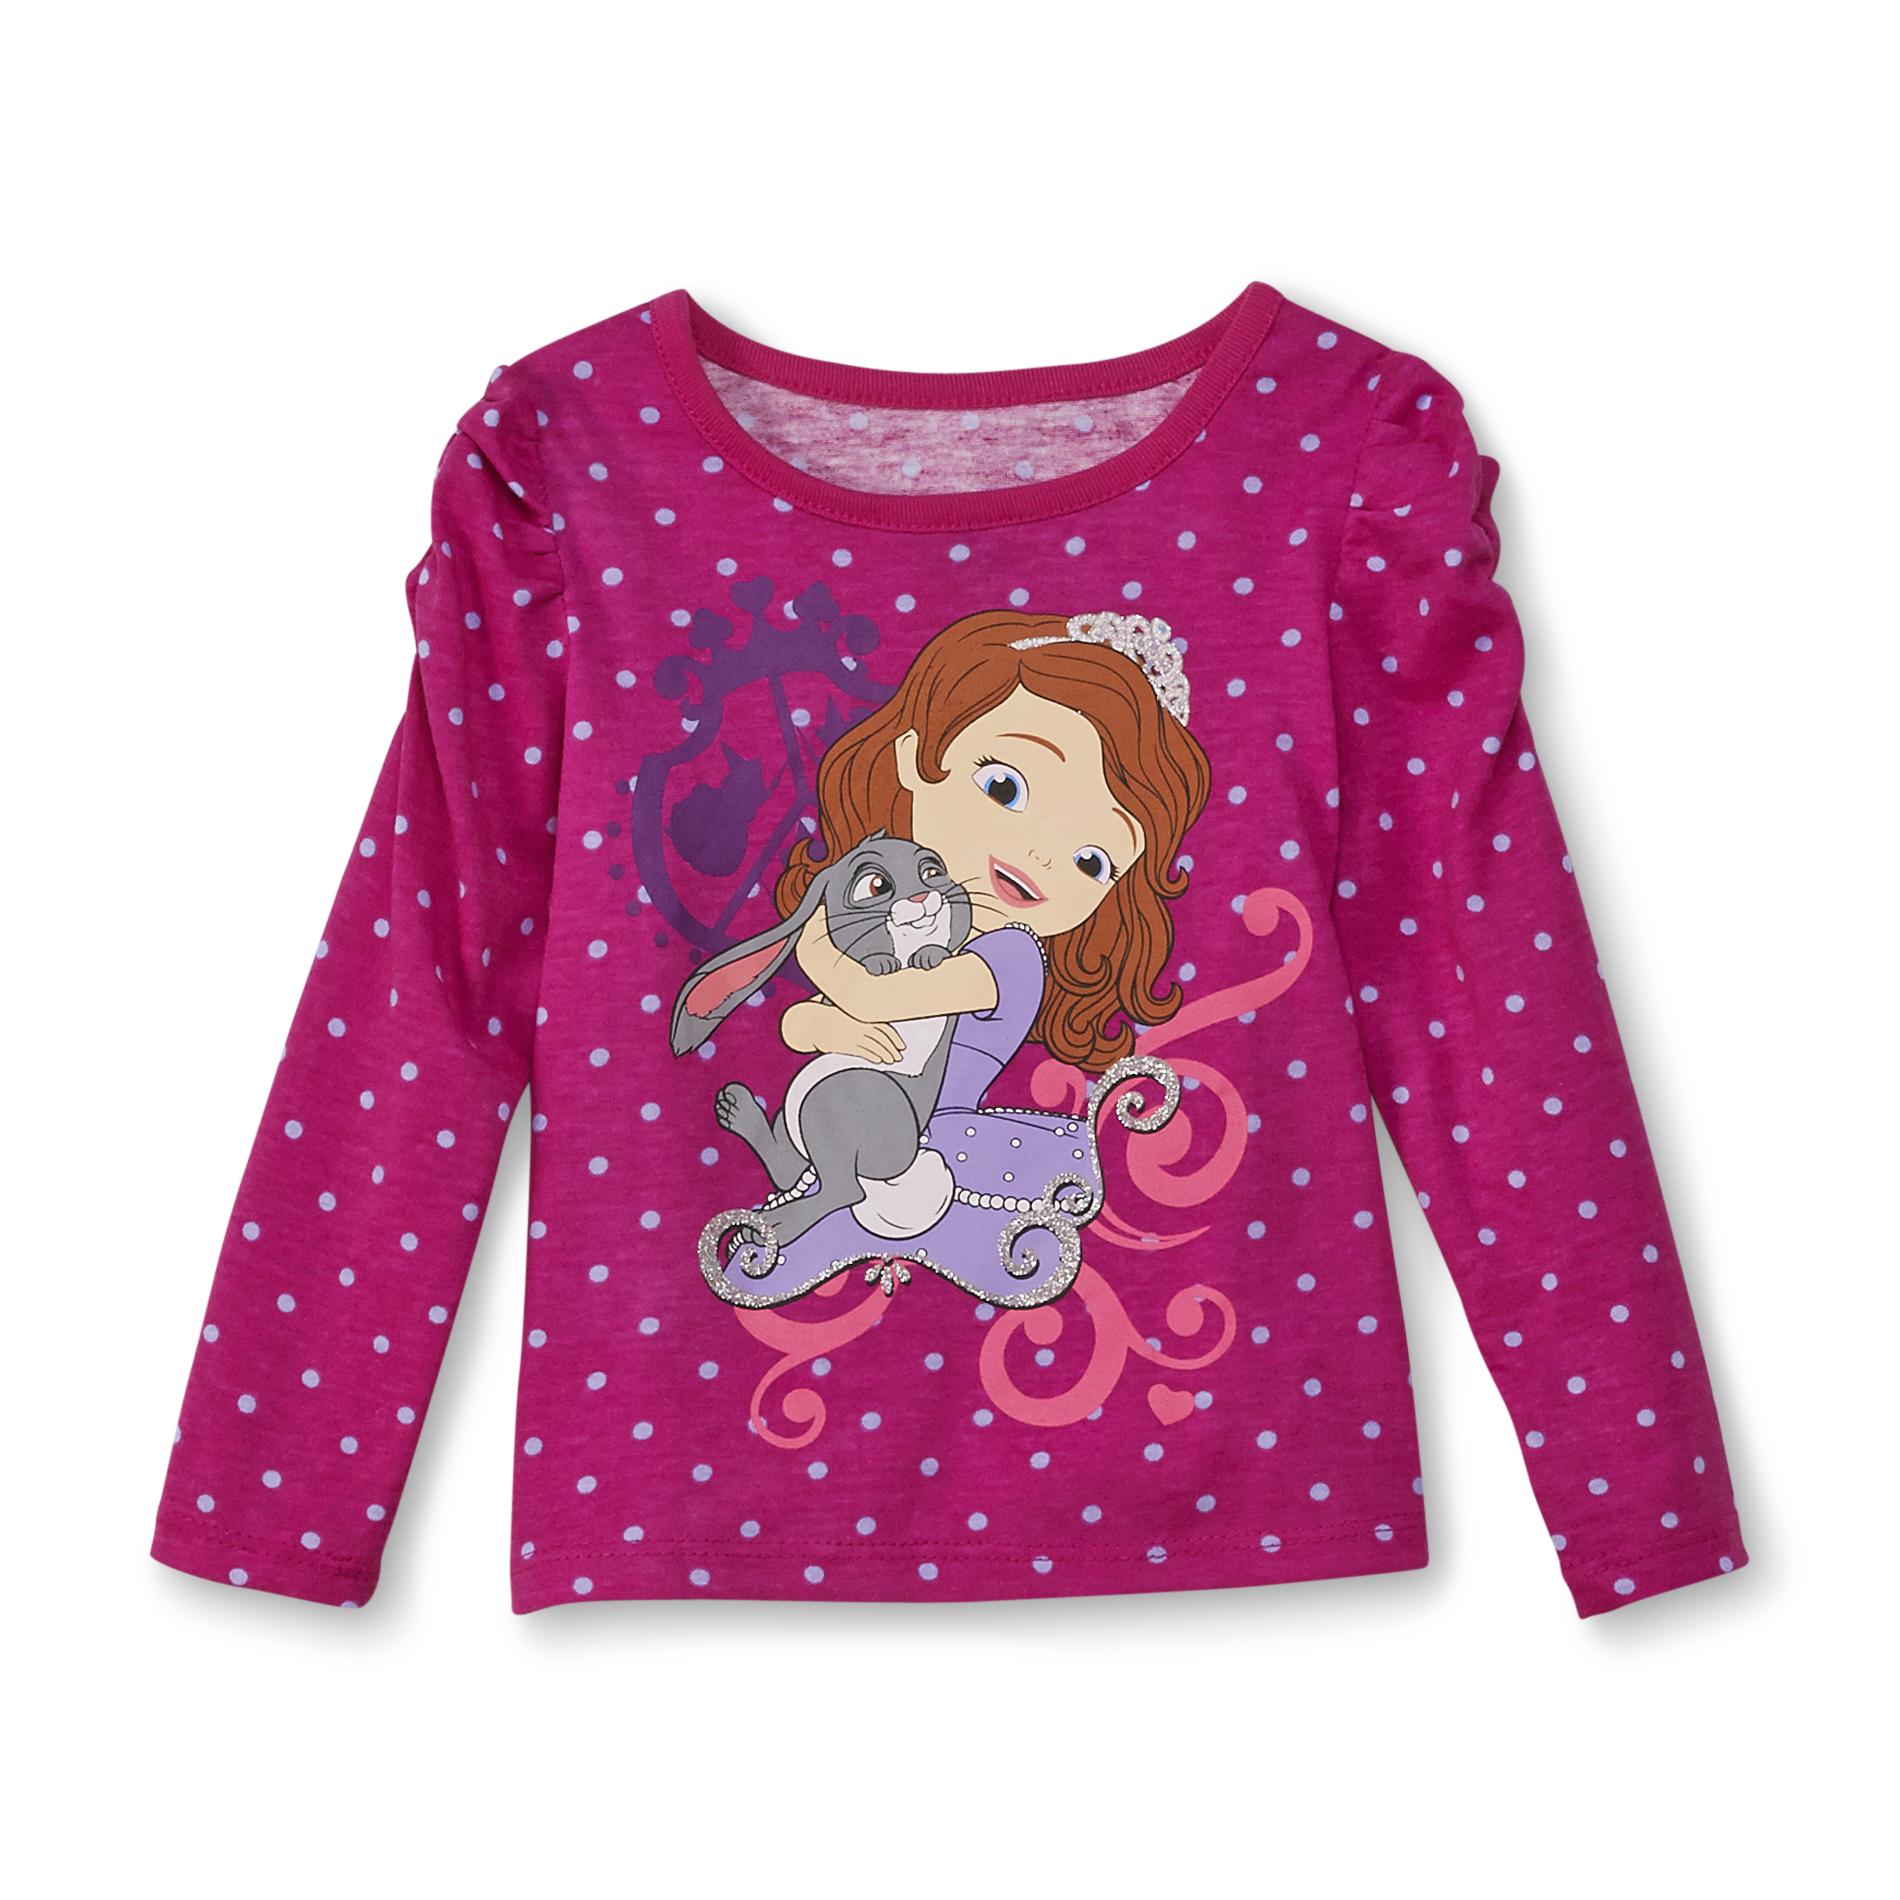 Disney Sofia The First Toddler Girl's Long-Sleeve Top